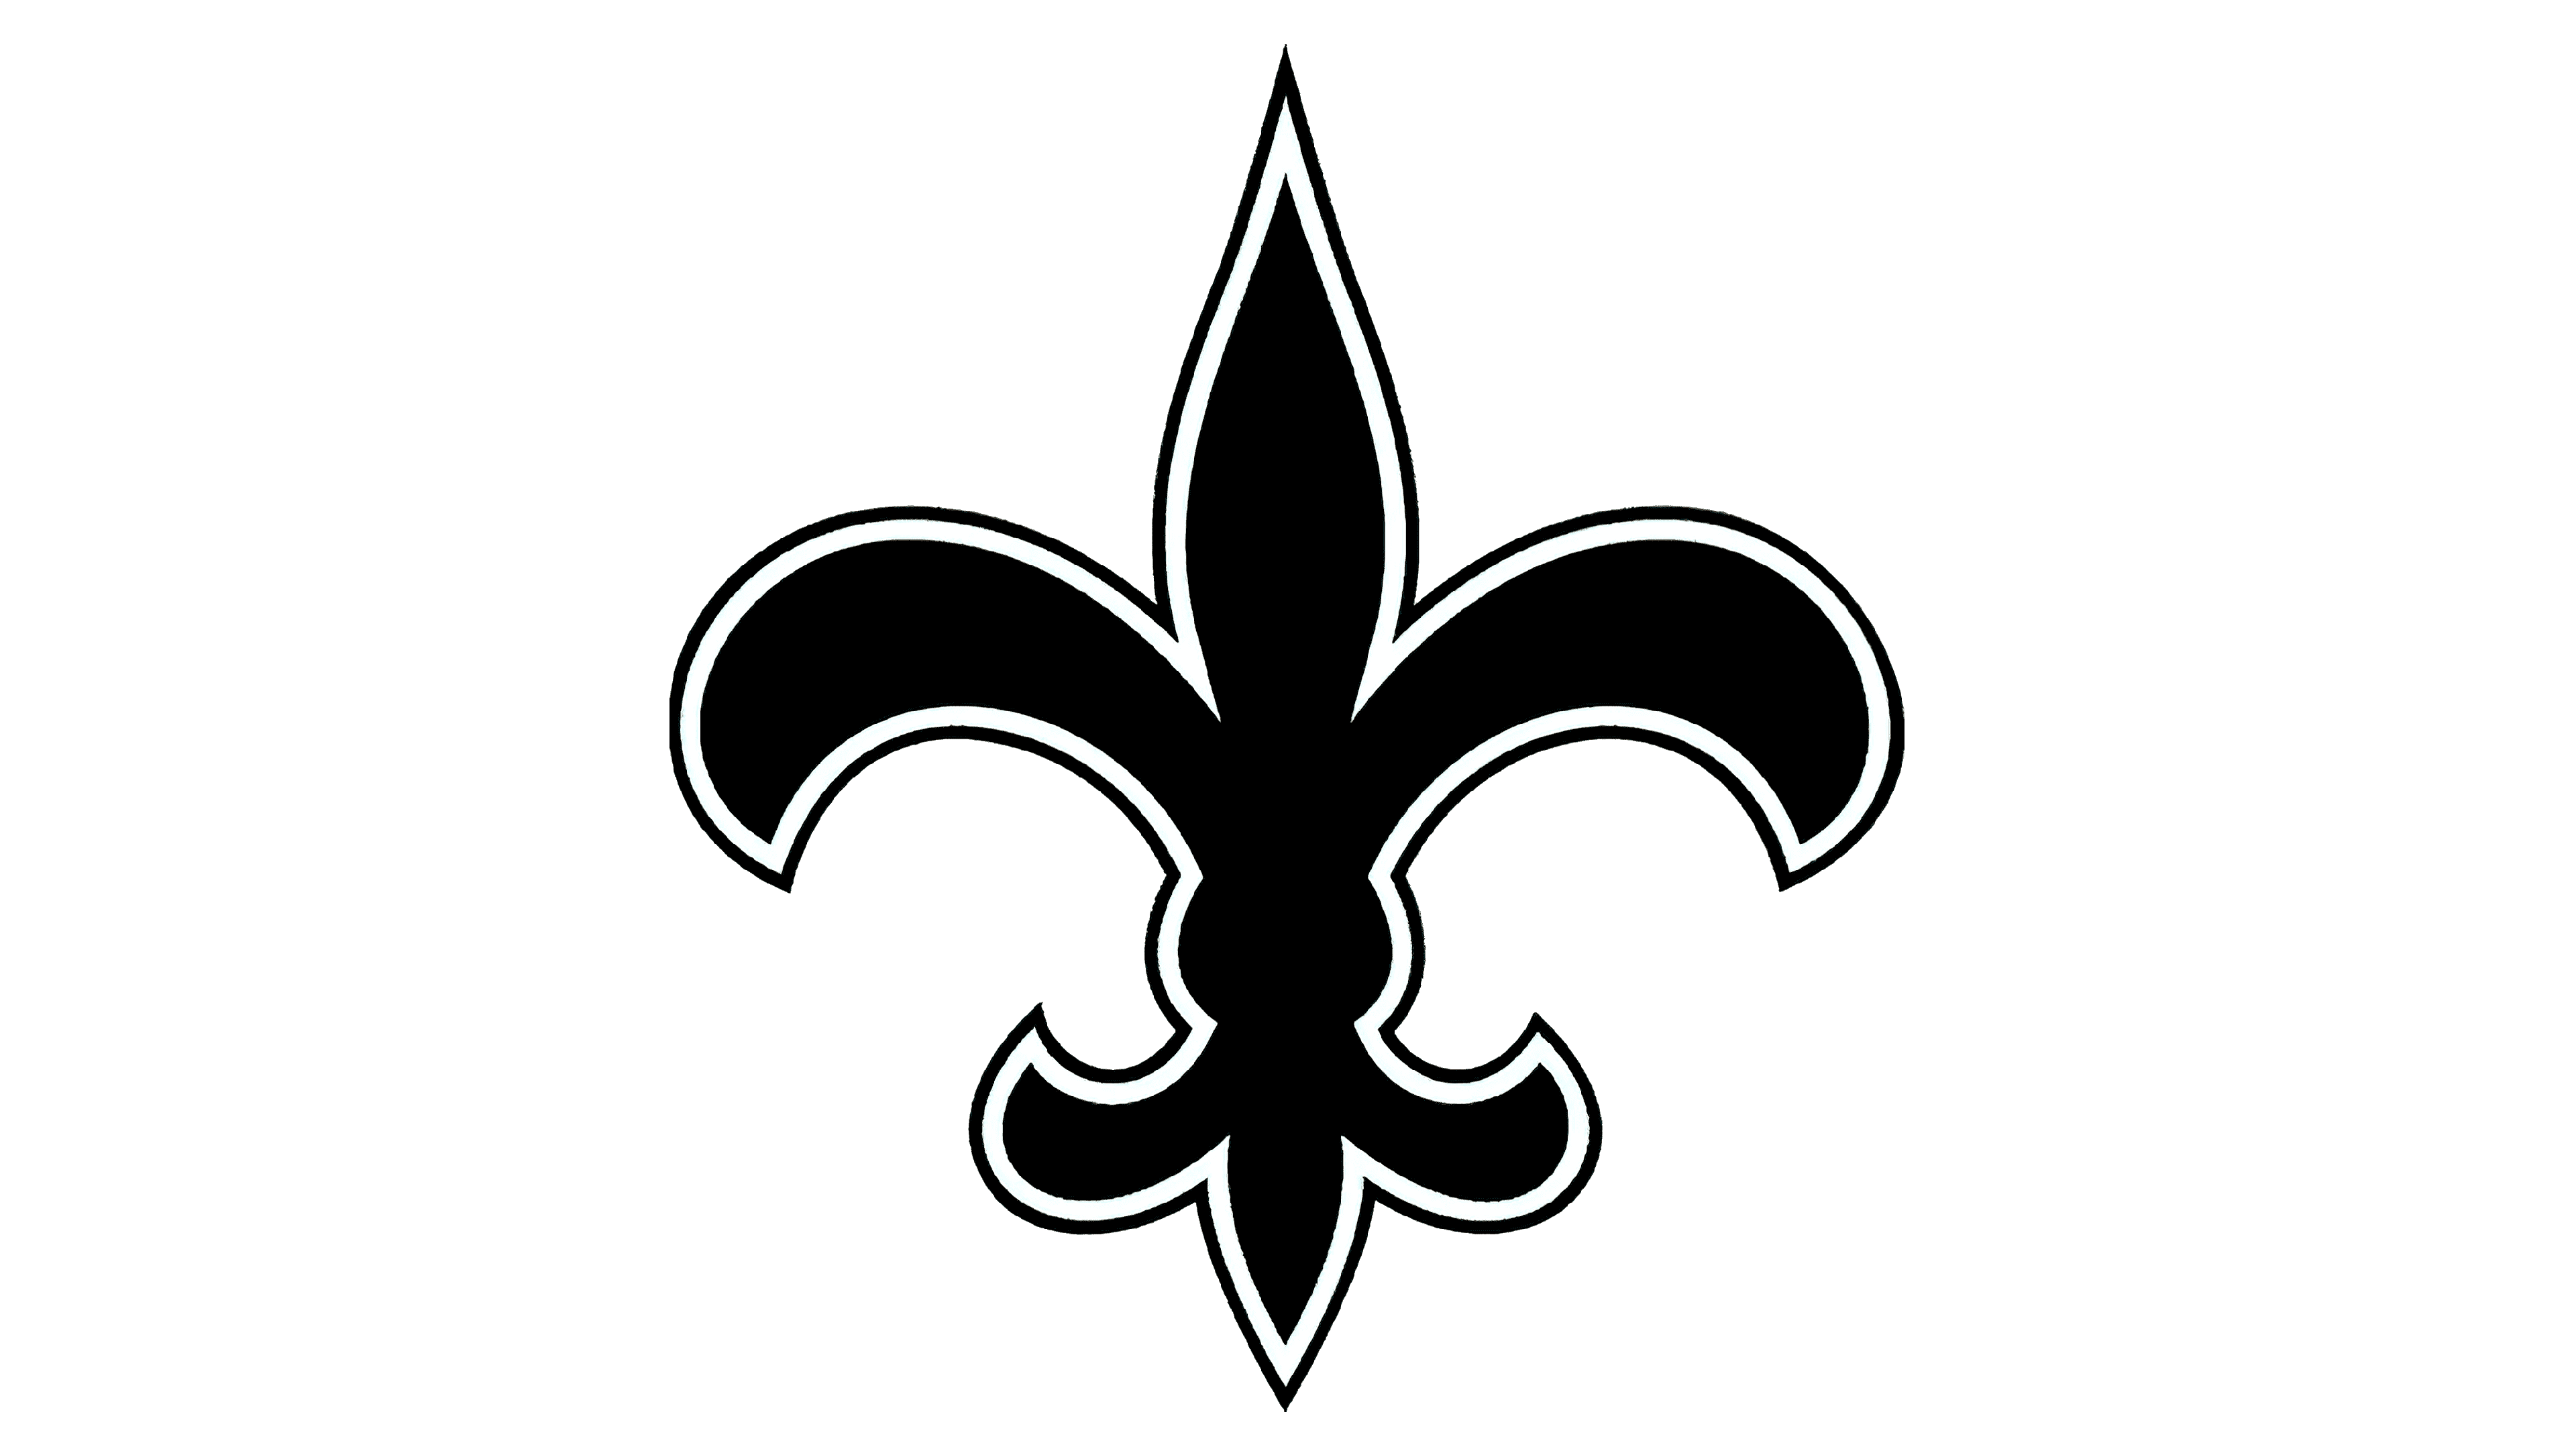 New Orleans Saints Logo and sign, new logo meaning and history, PNG, SVG